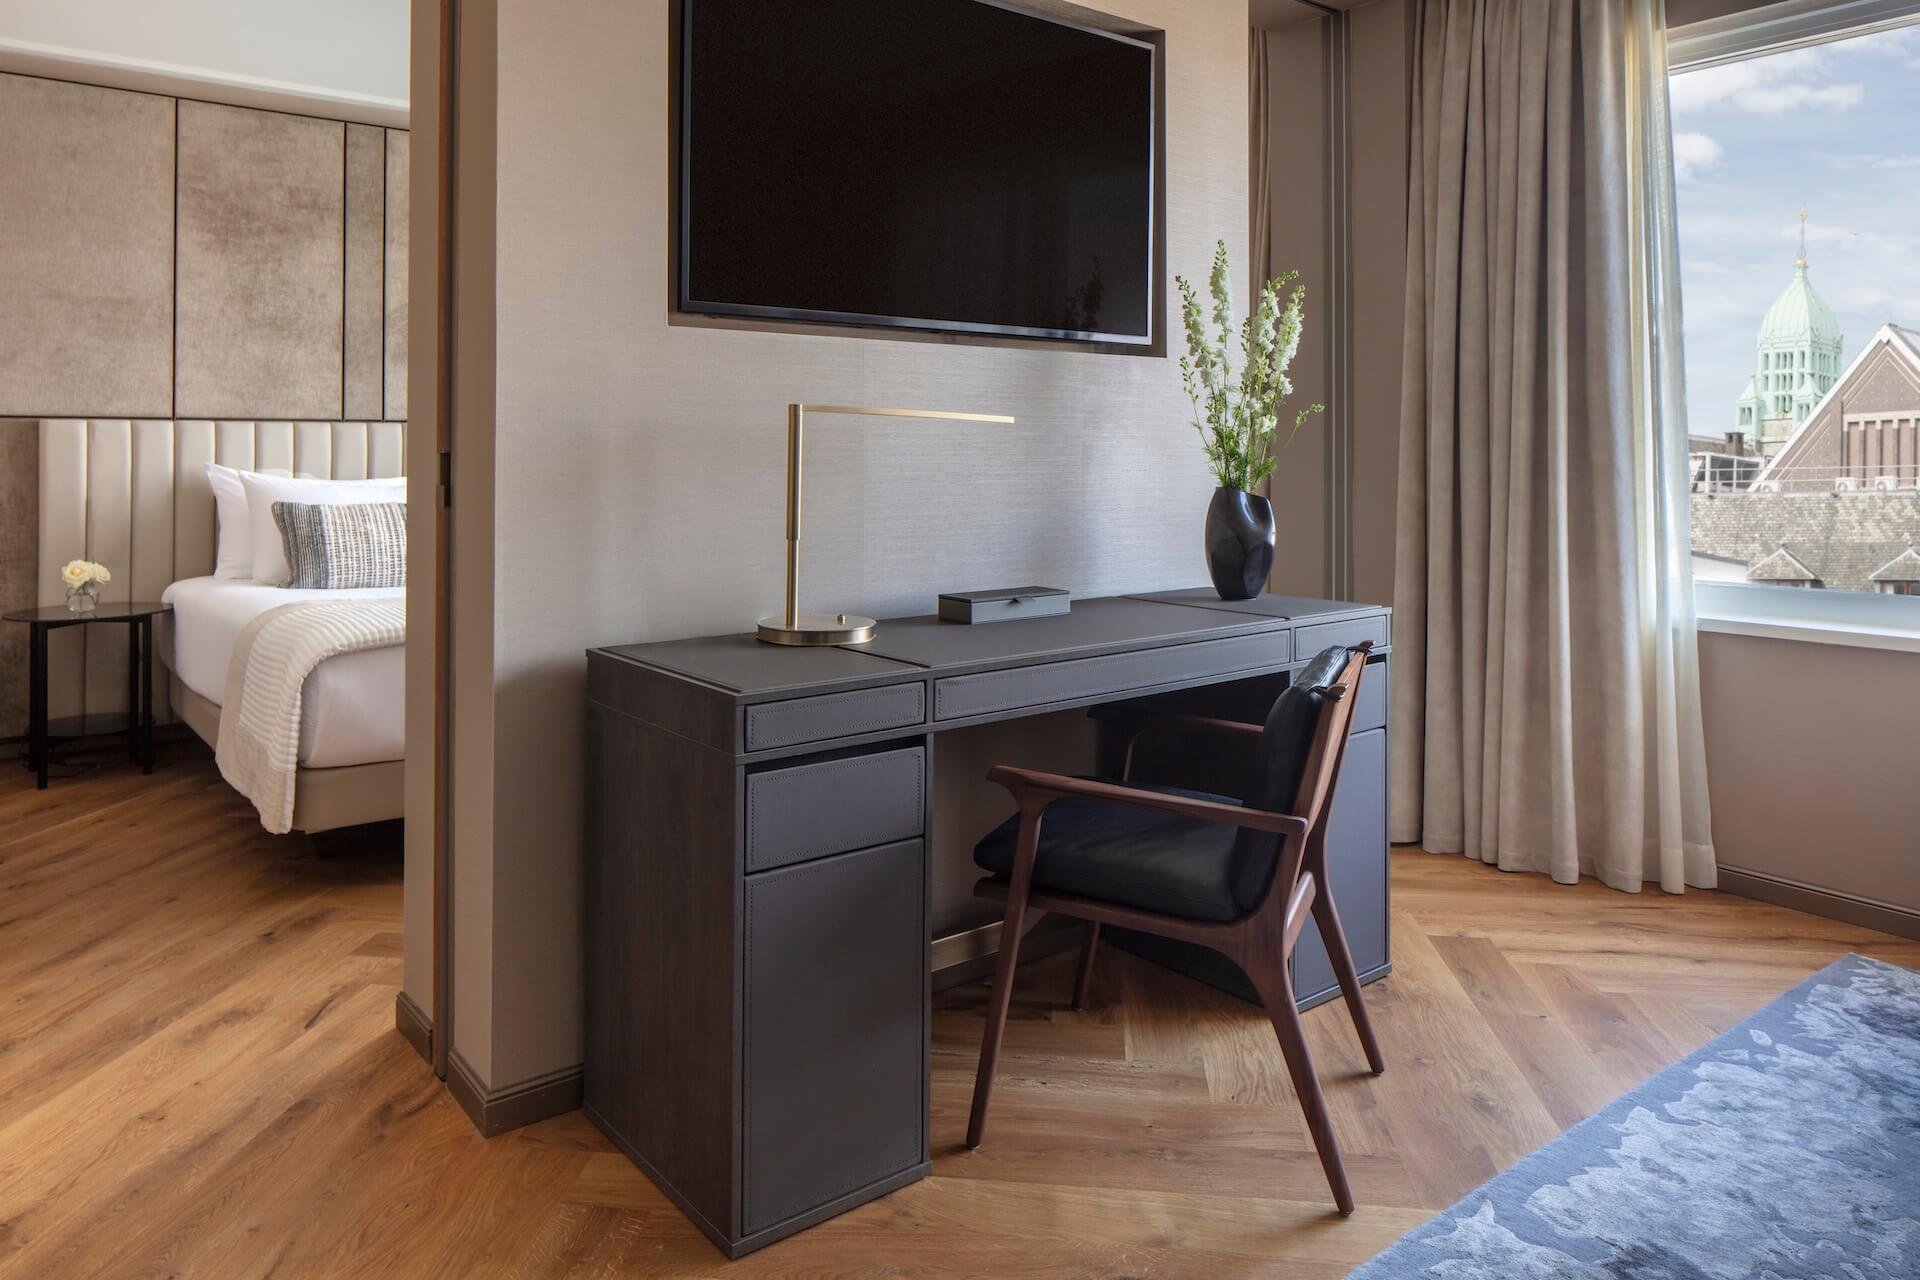 Anantara_Grand_Hotel_Krasnapolsky_Amsterdam_Room_Grand_Deluxe_Living_Area_Seeing_Through_The_Bedroom.jpeg